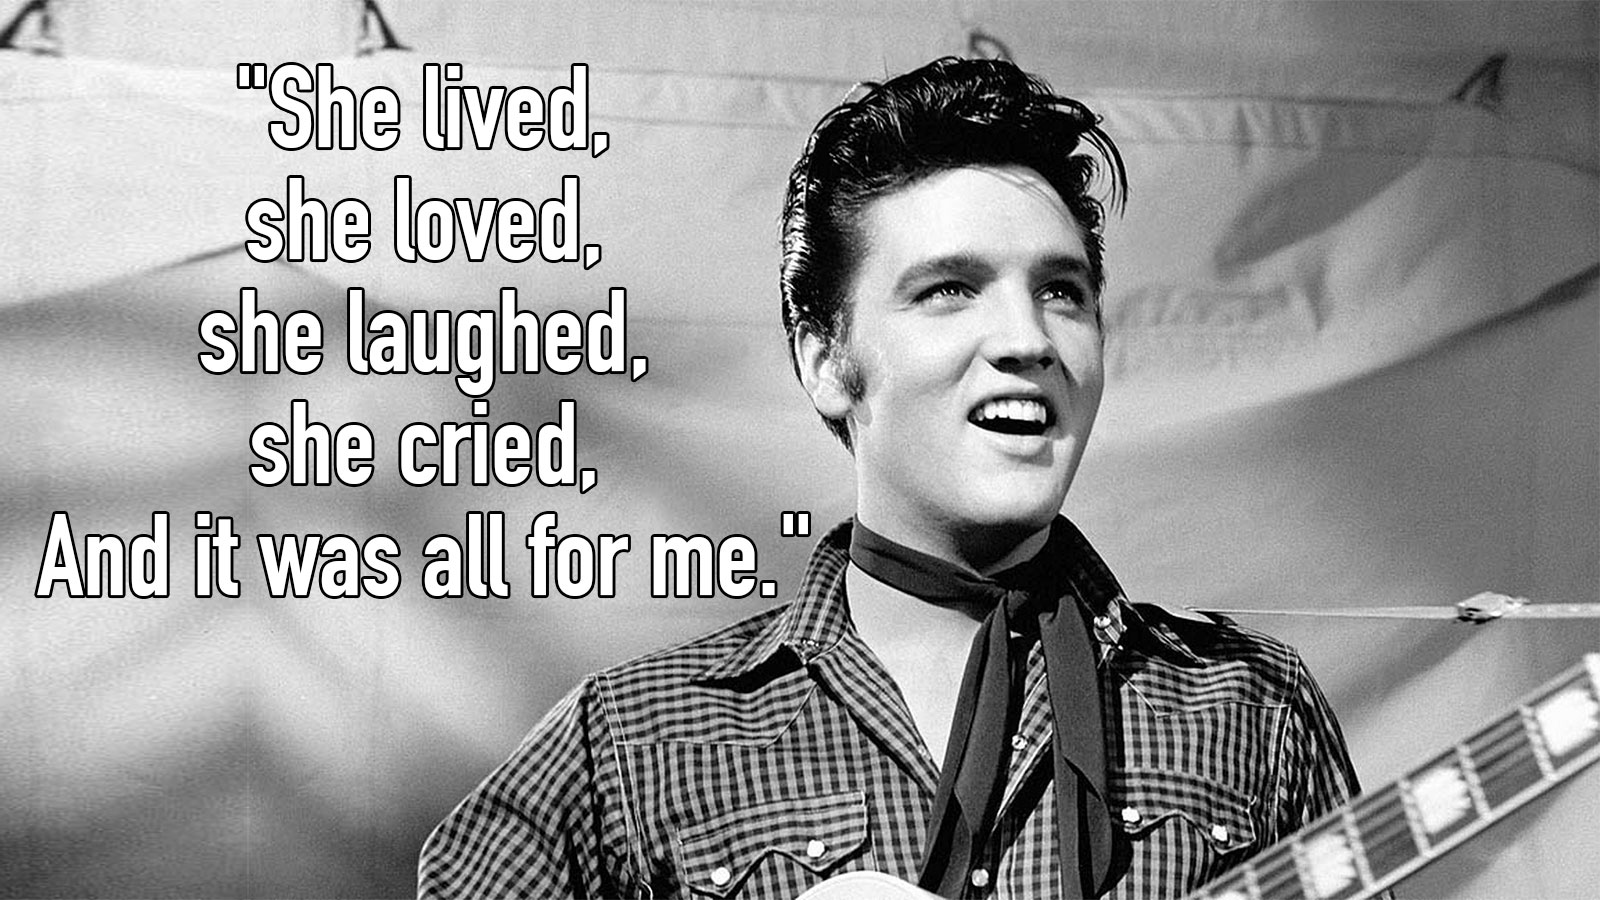 Can You Guess the Elvis Presley Song This Lyric Is From? Quiz 91